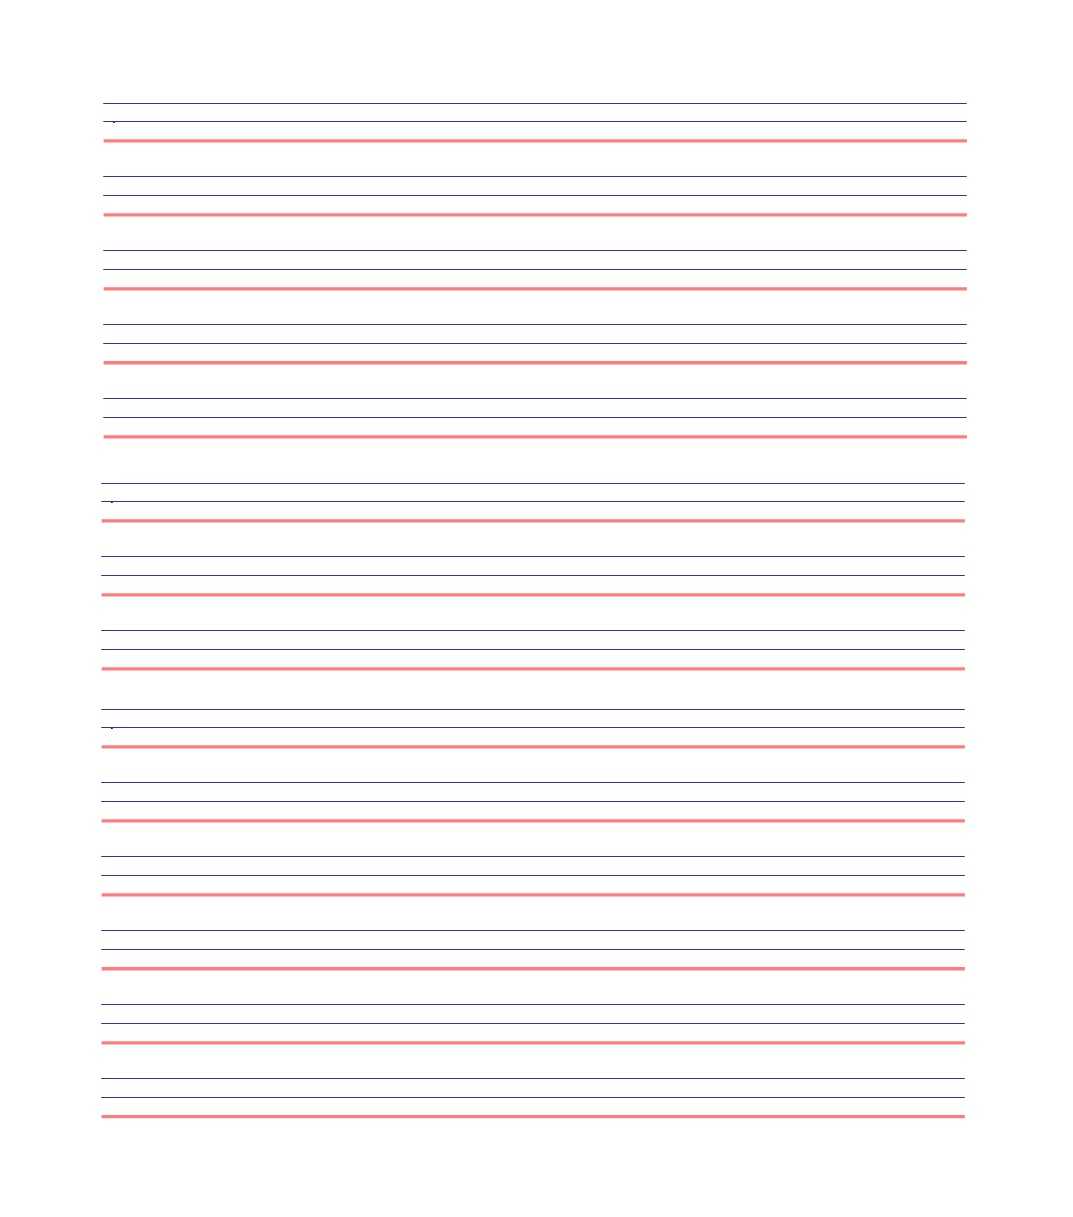 Microsoft Word Notebook Paper Template - Tomope.zaribanks.co Within Notebook Paper Template For Word